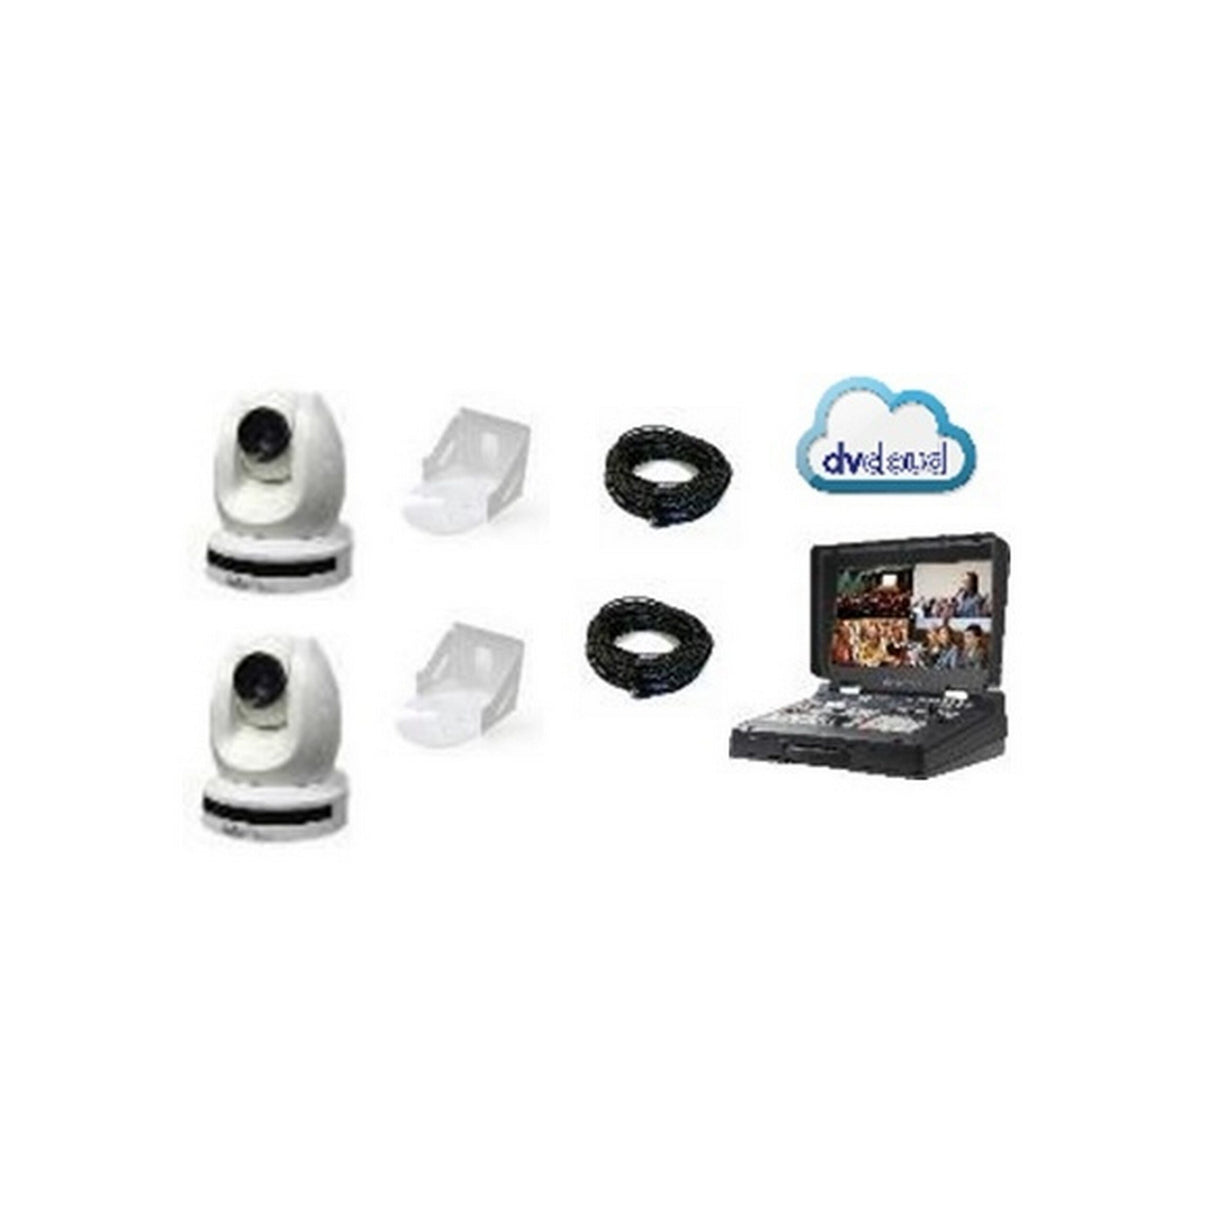 Datavideo CAM-CLOUD SRT PACKAGE C1W PTC-150TWL Camera Streaming Kit with 12 Month dvCloud Essentials Subscription